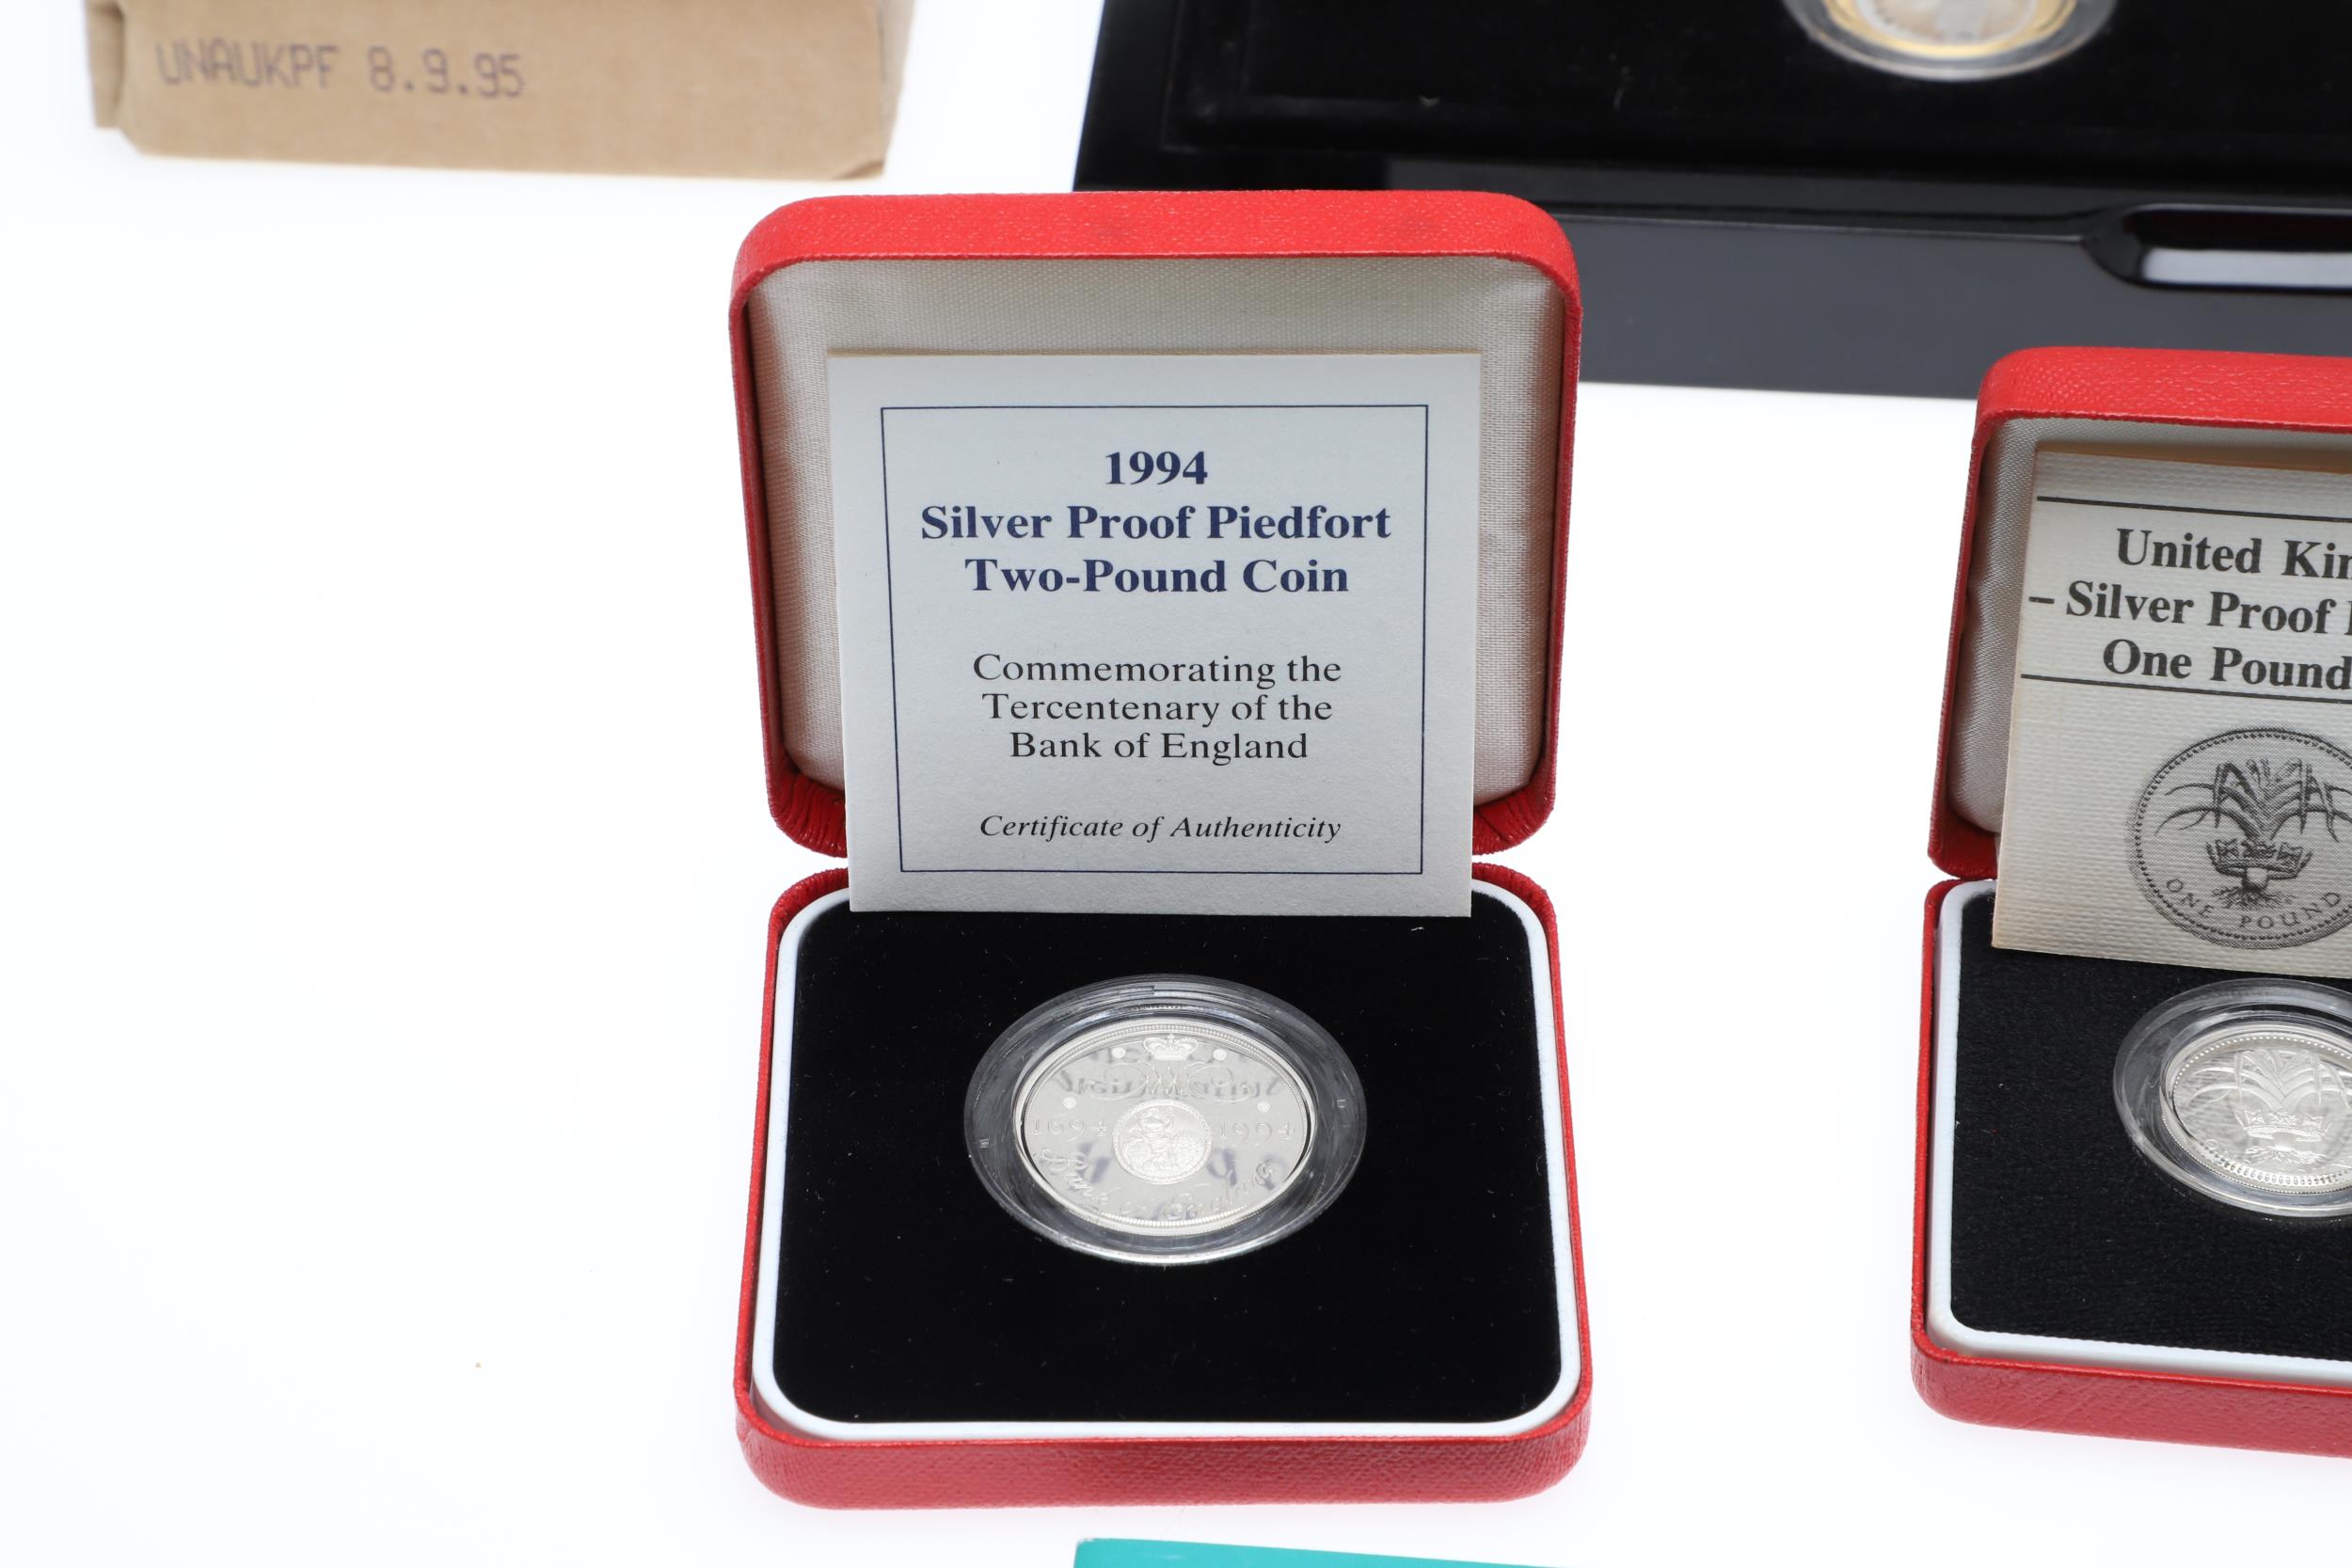 A COLLECTION OF ROYAL MINT PIEDFORT ISSUES TO INCLUDE 2017 SILVER PROOF PIEDFORT COIN SET. - Image 5 of 15